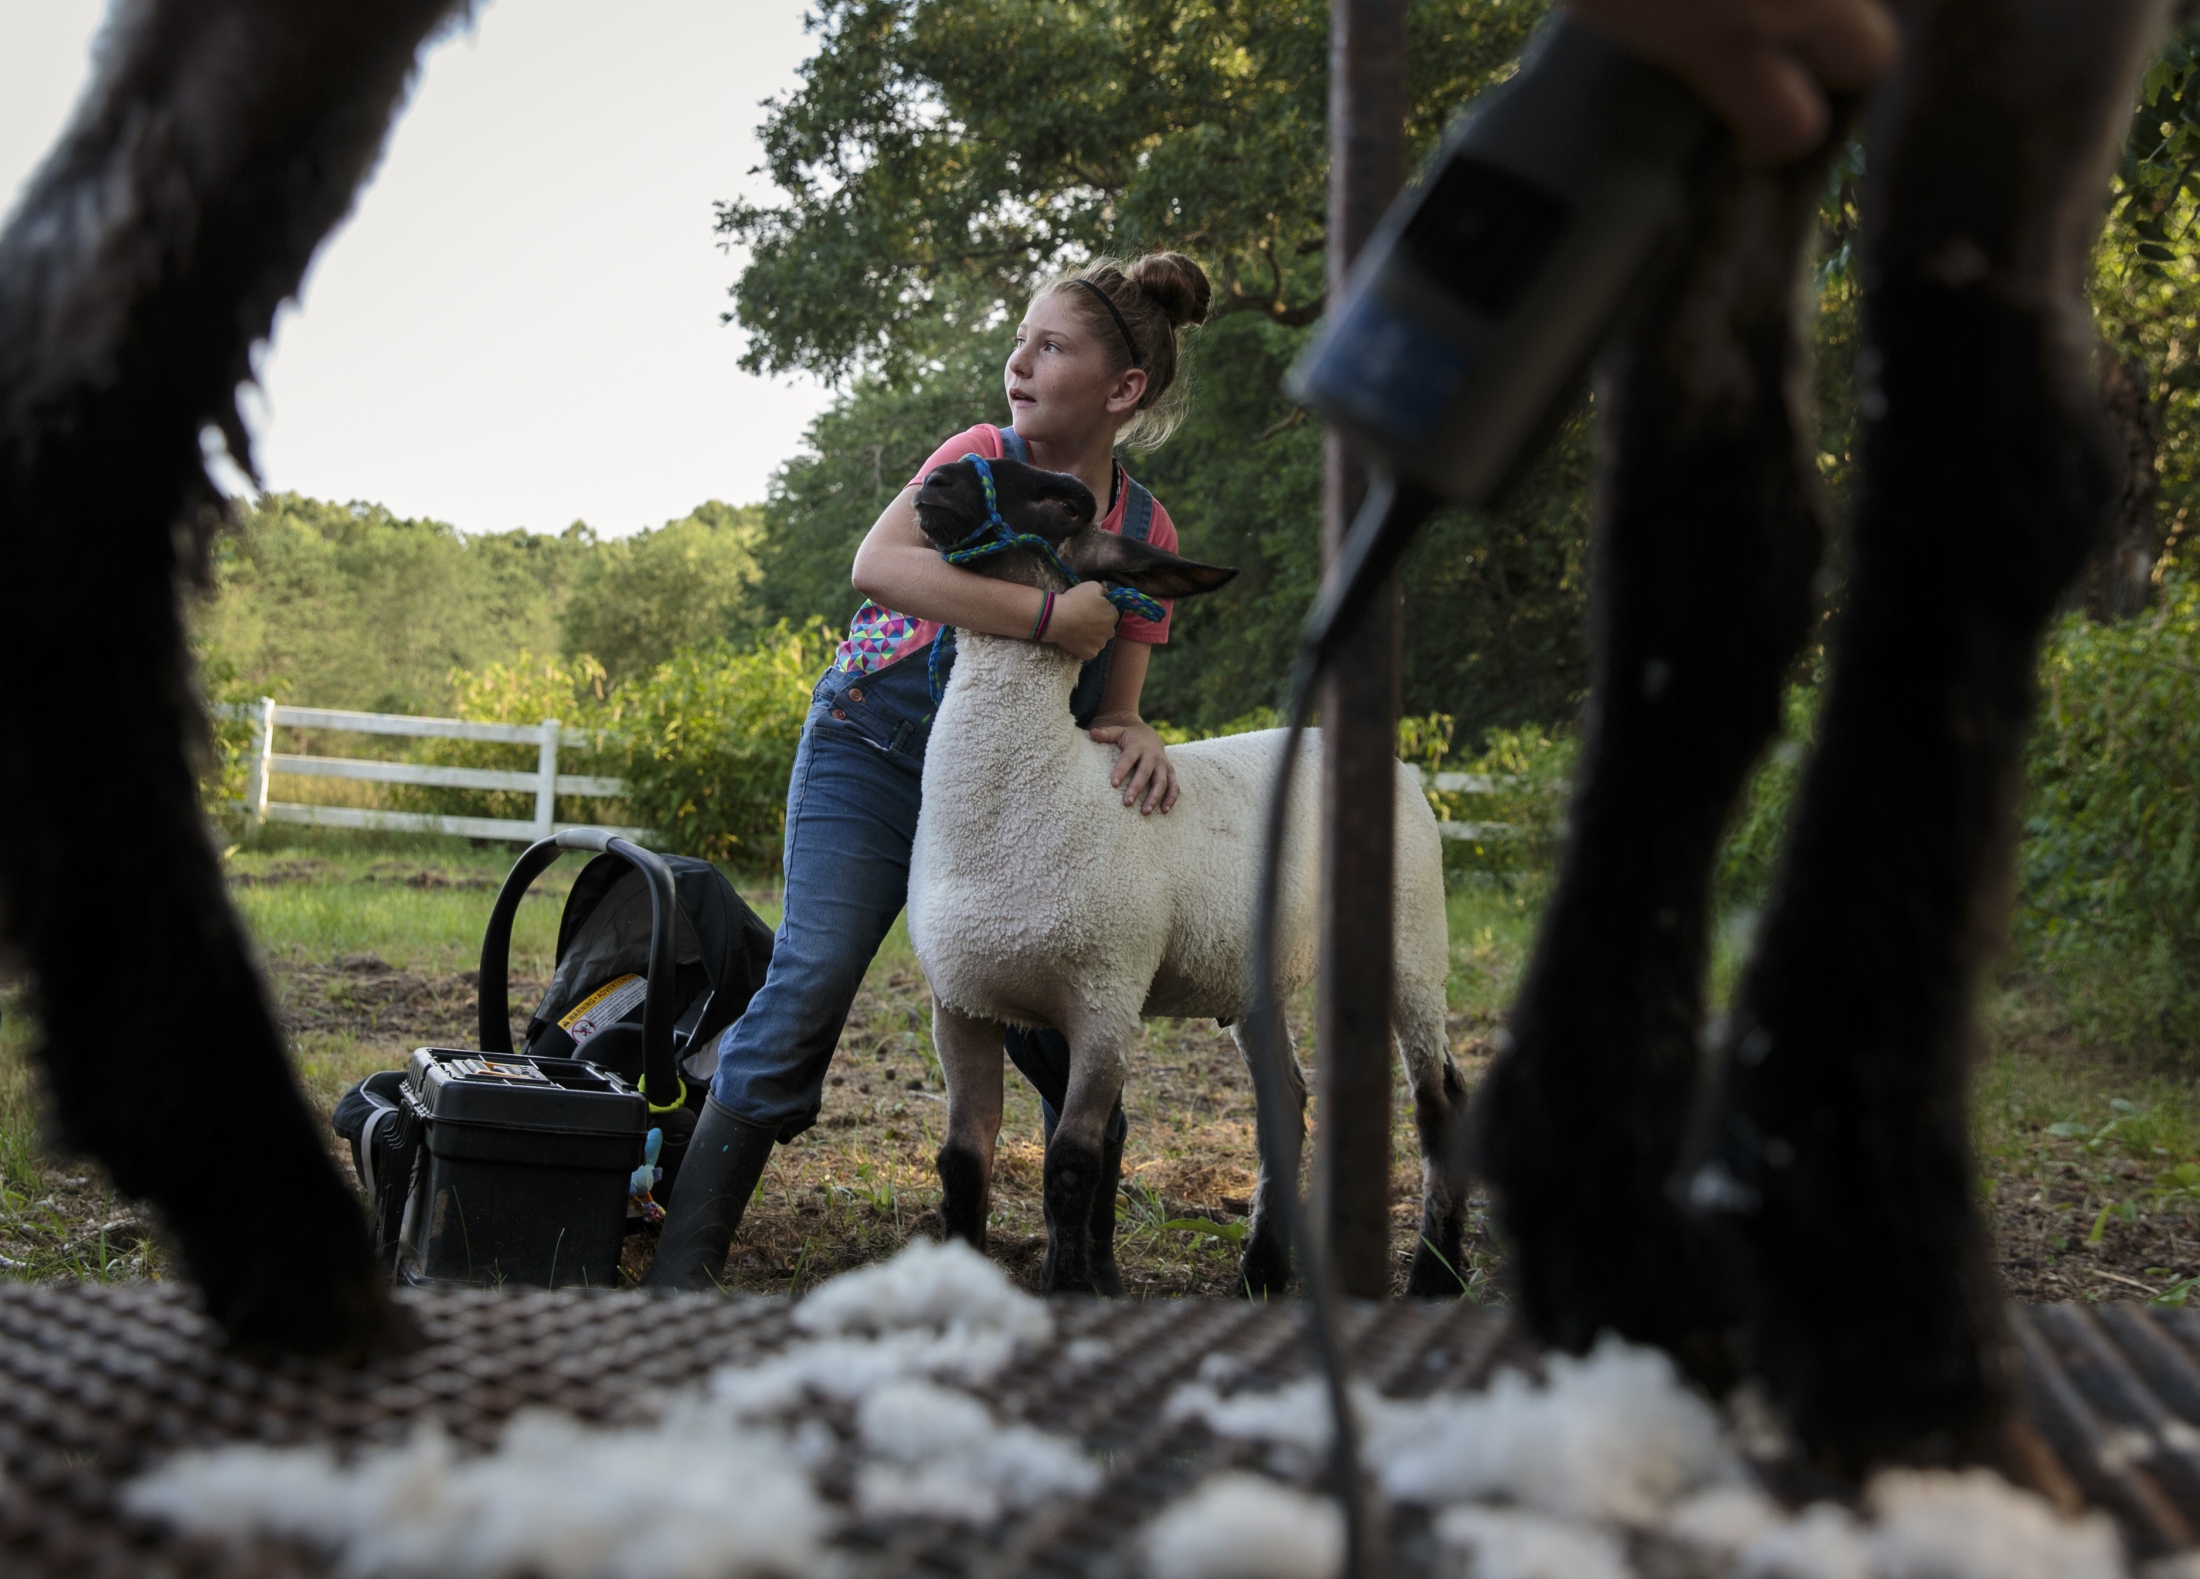 Back to the Land - Mackenzie holds her sheep Gunter while her other sheep,...